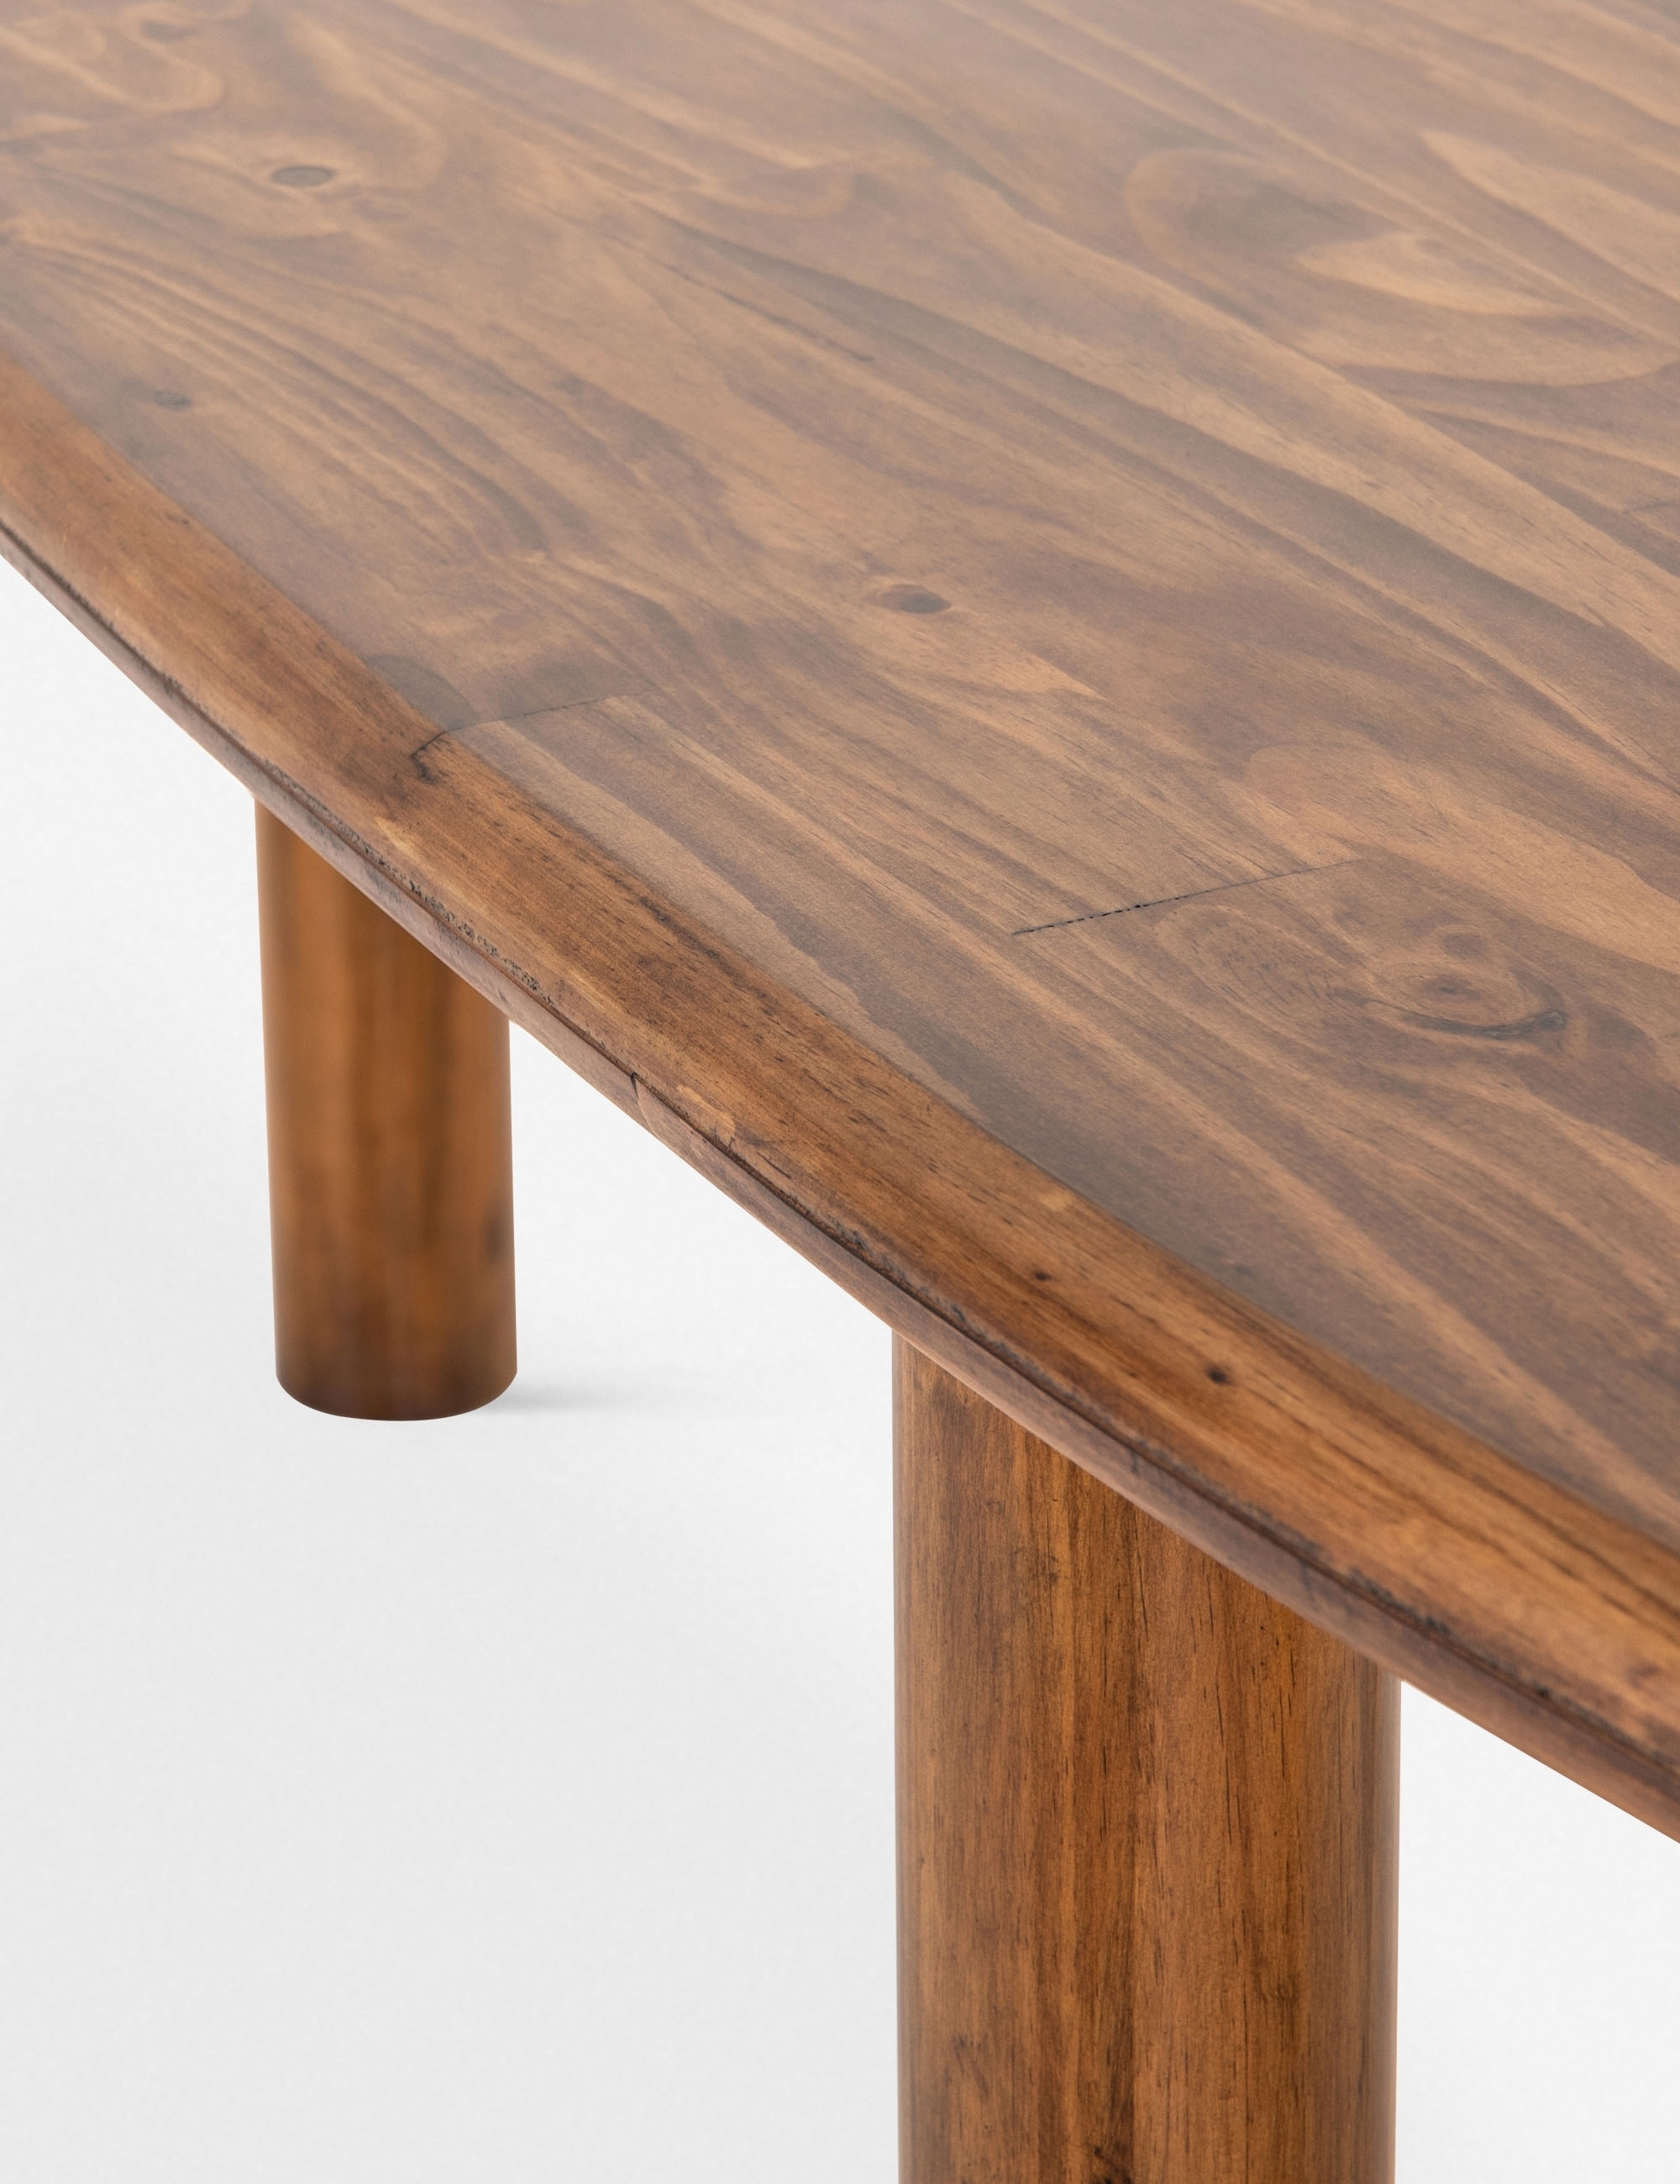 Marquesa Dining Table - Image 1